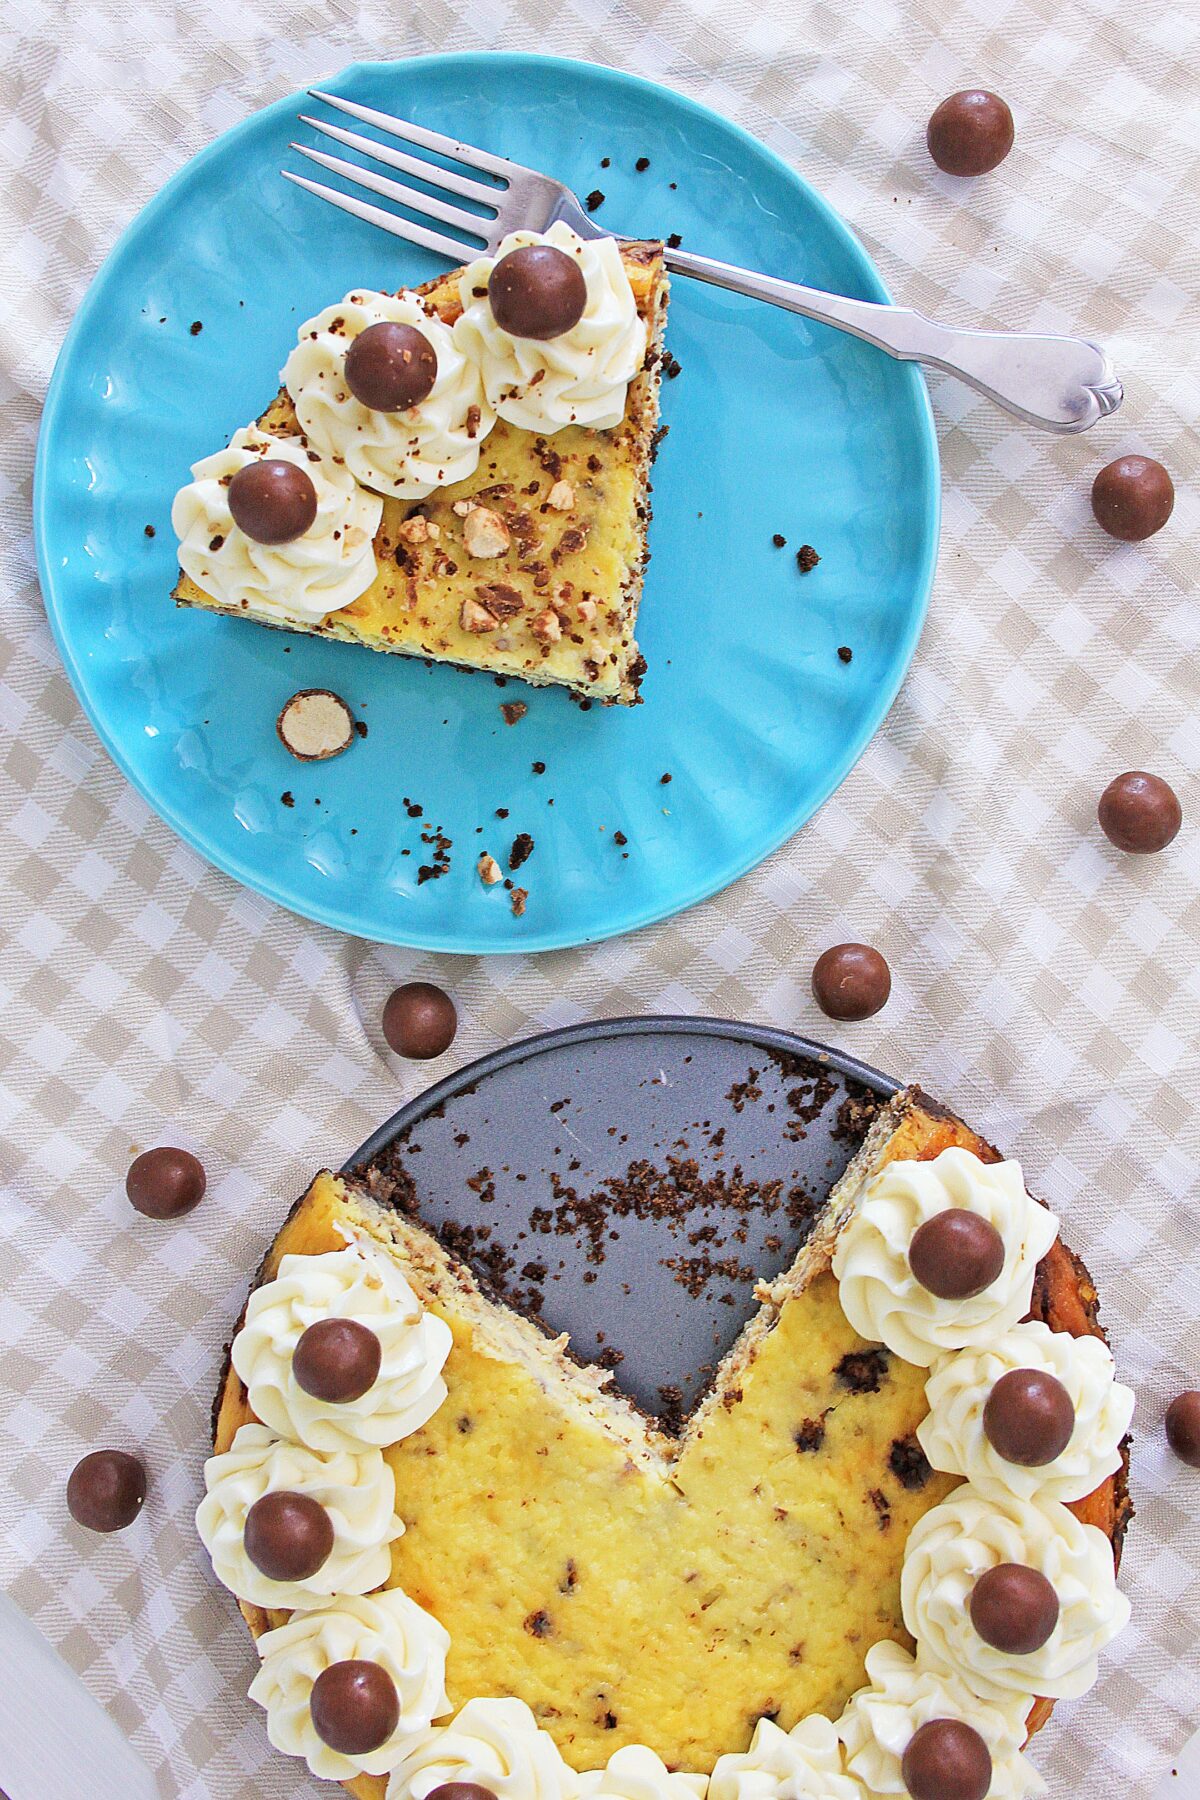 This Instant Pot Malted Milk Ball cheesecake is a creamy and fun dessert filled with whoppers that you can make in less than an hour.